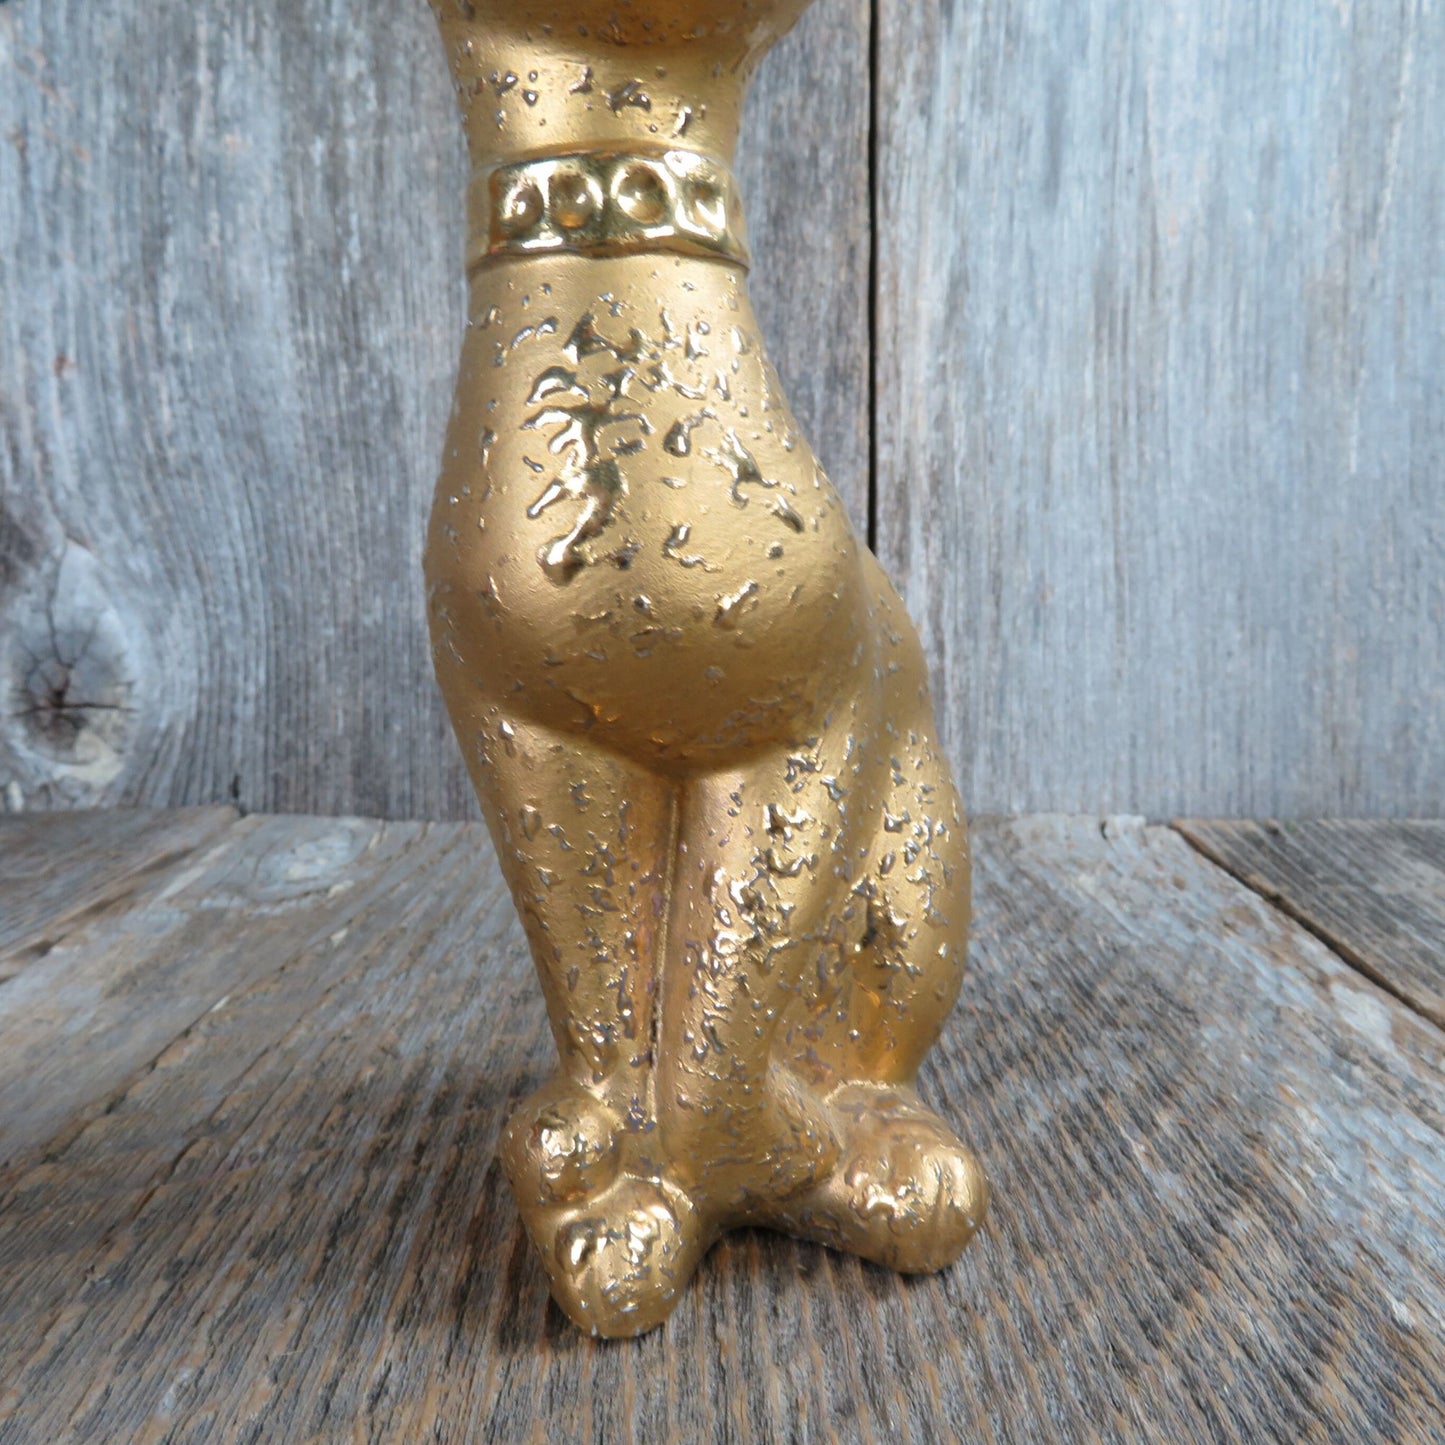 Chihuahua Figurine Gold Dog Textured Ceramic Tall Ears Google Eyes Vintage